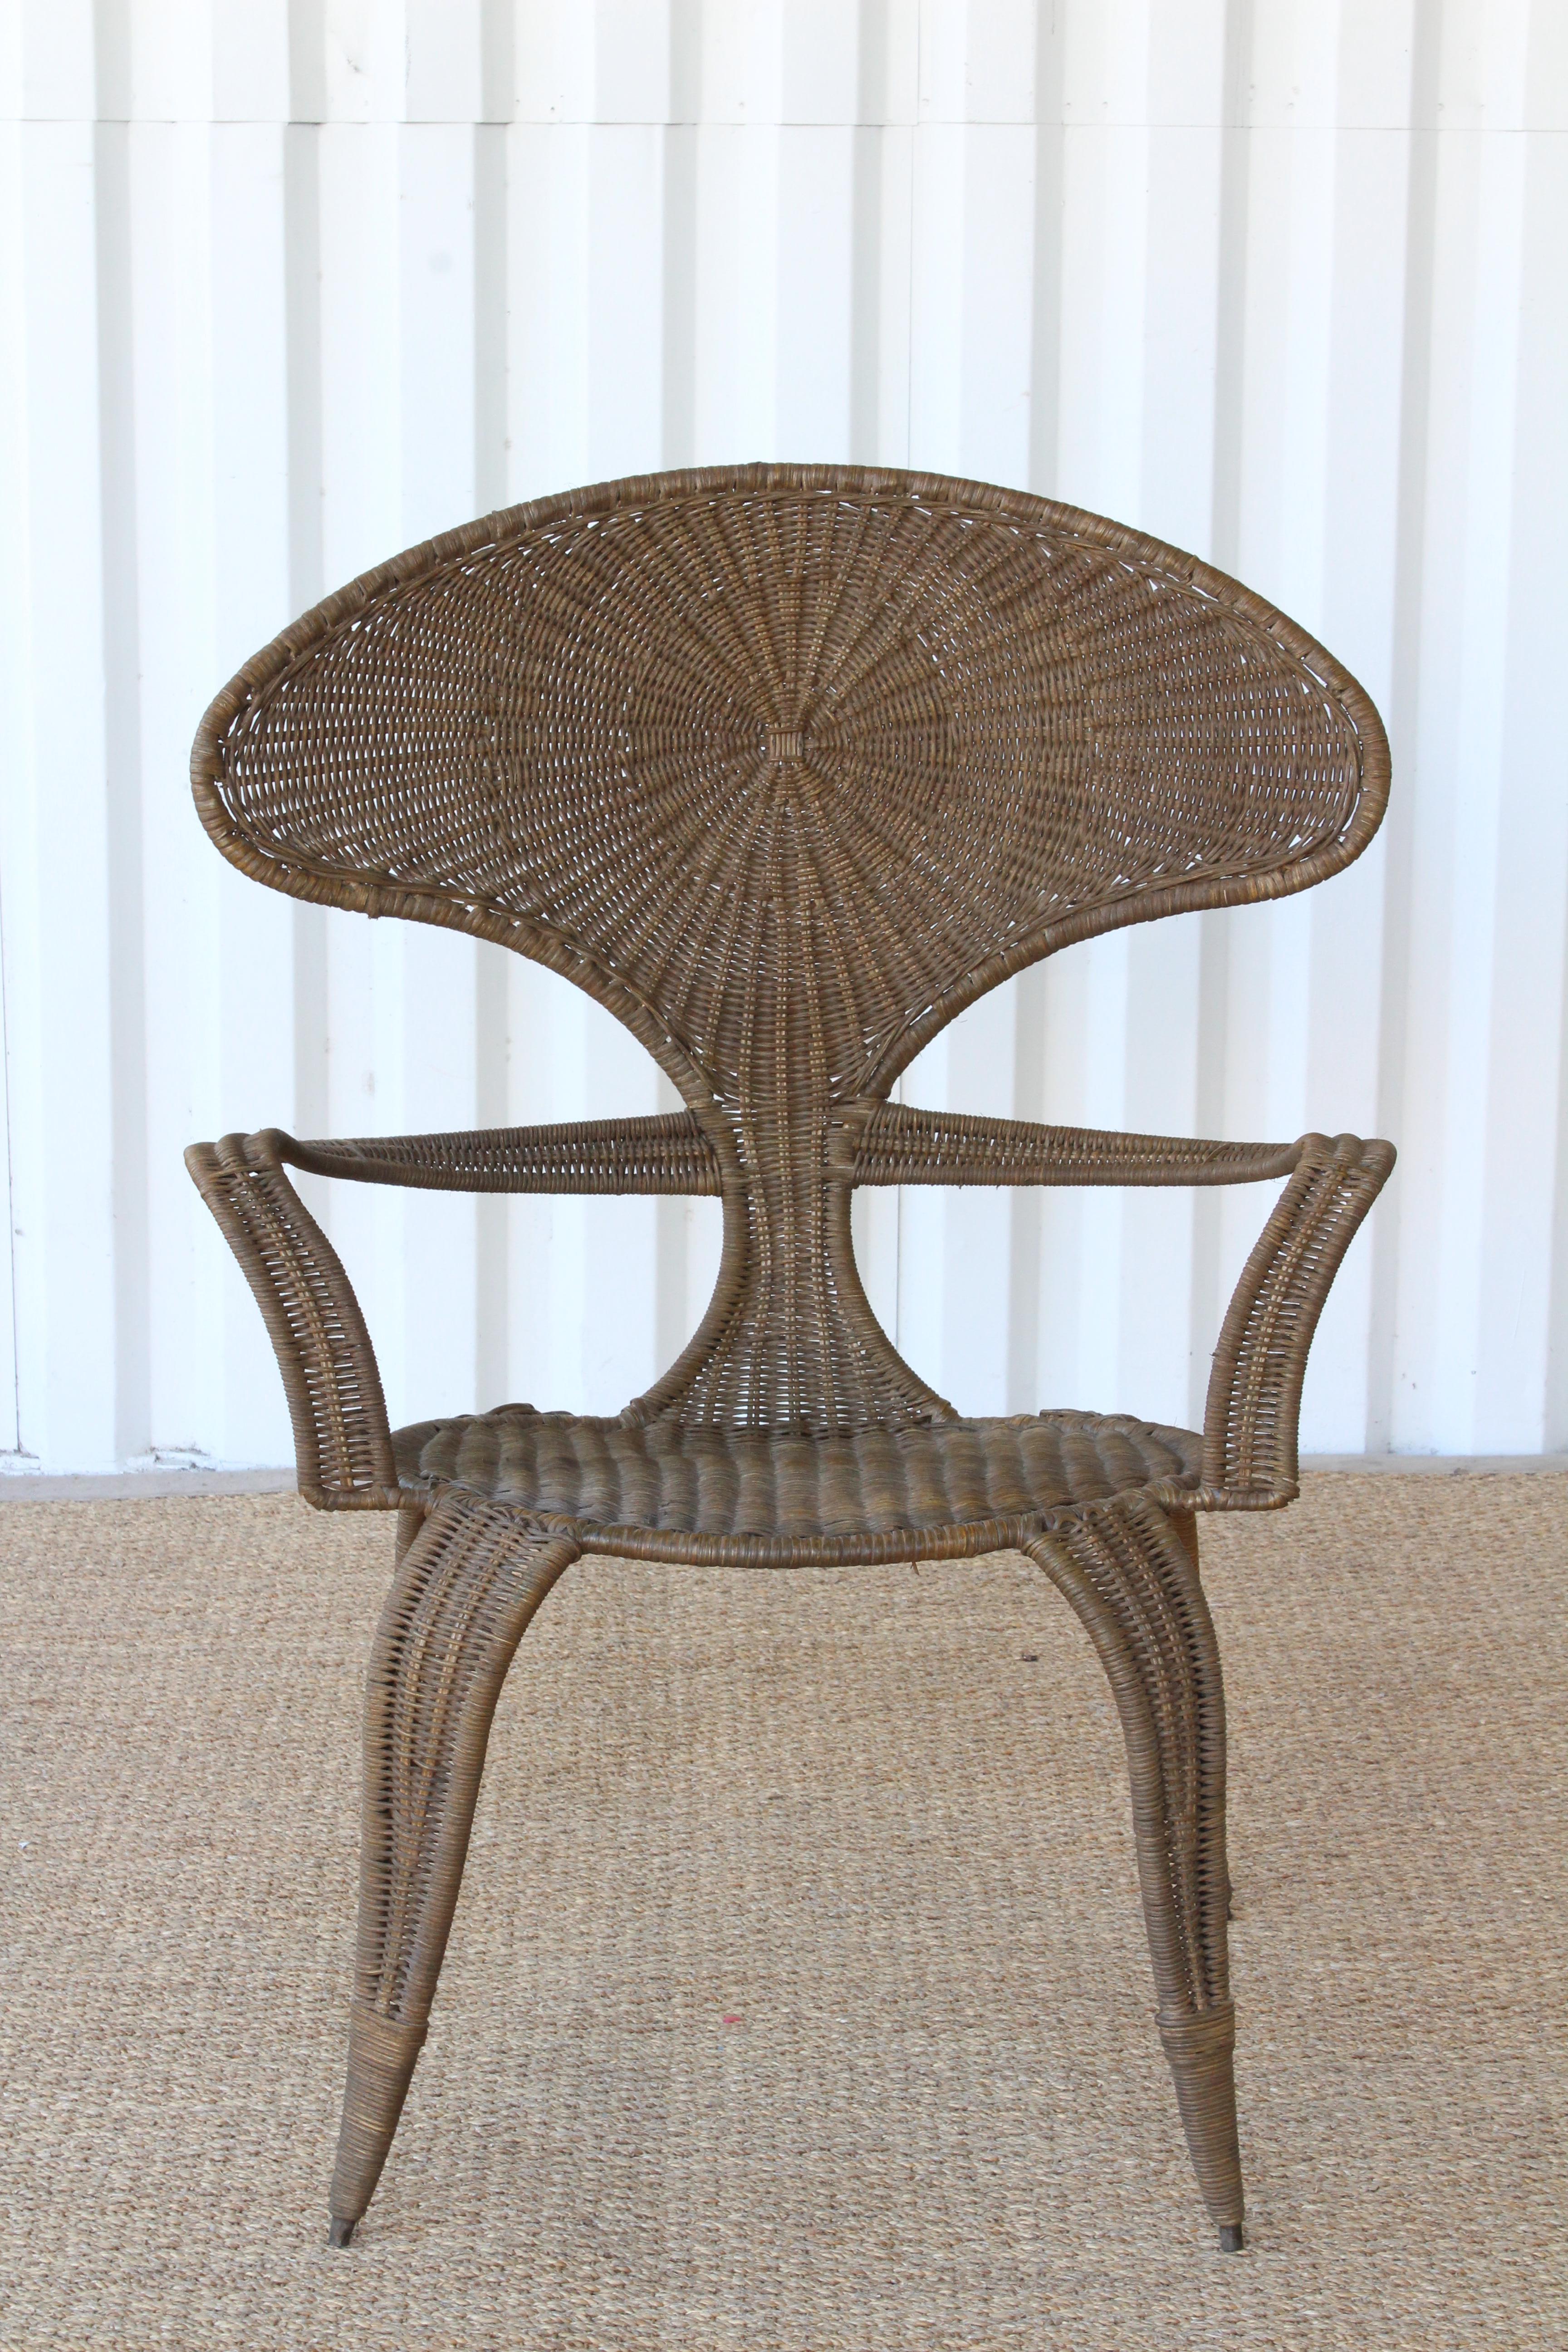 Vintage iron framed chair with new wicker, designed by Danny Ho Fong for Tropi-Cal. 